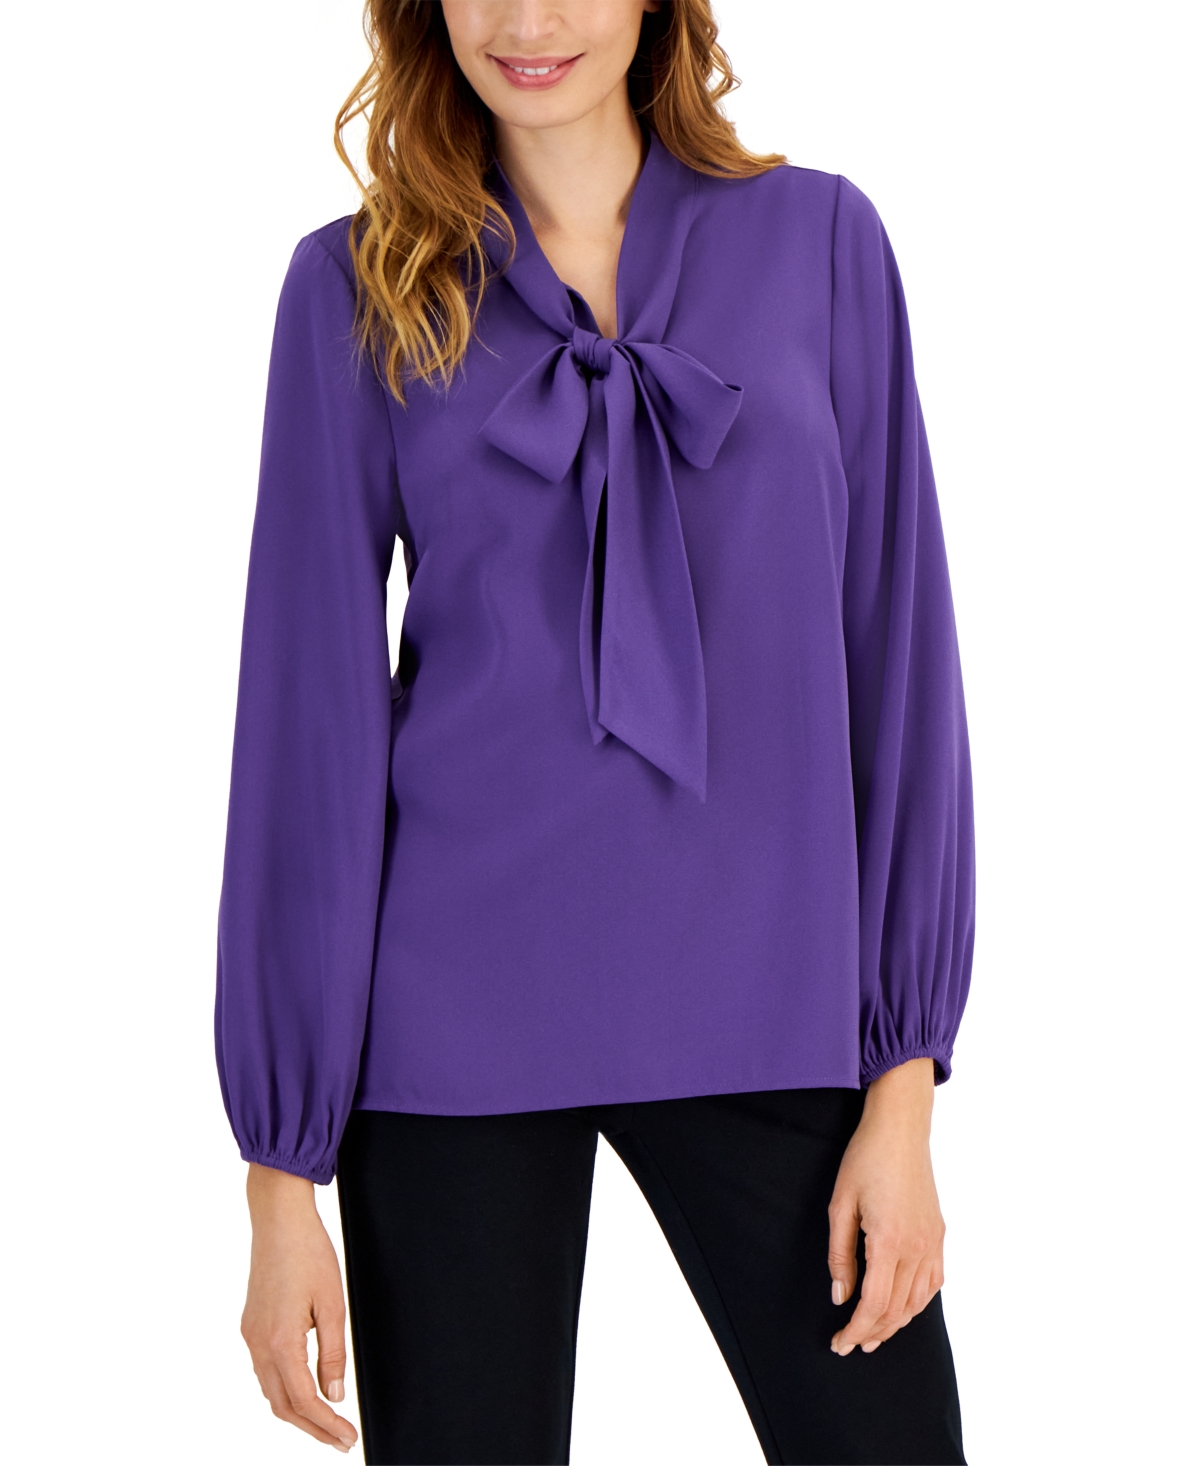 Women's Bow Neck Long Sleeve Top - Prism Violet